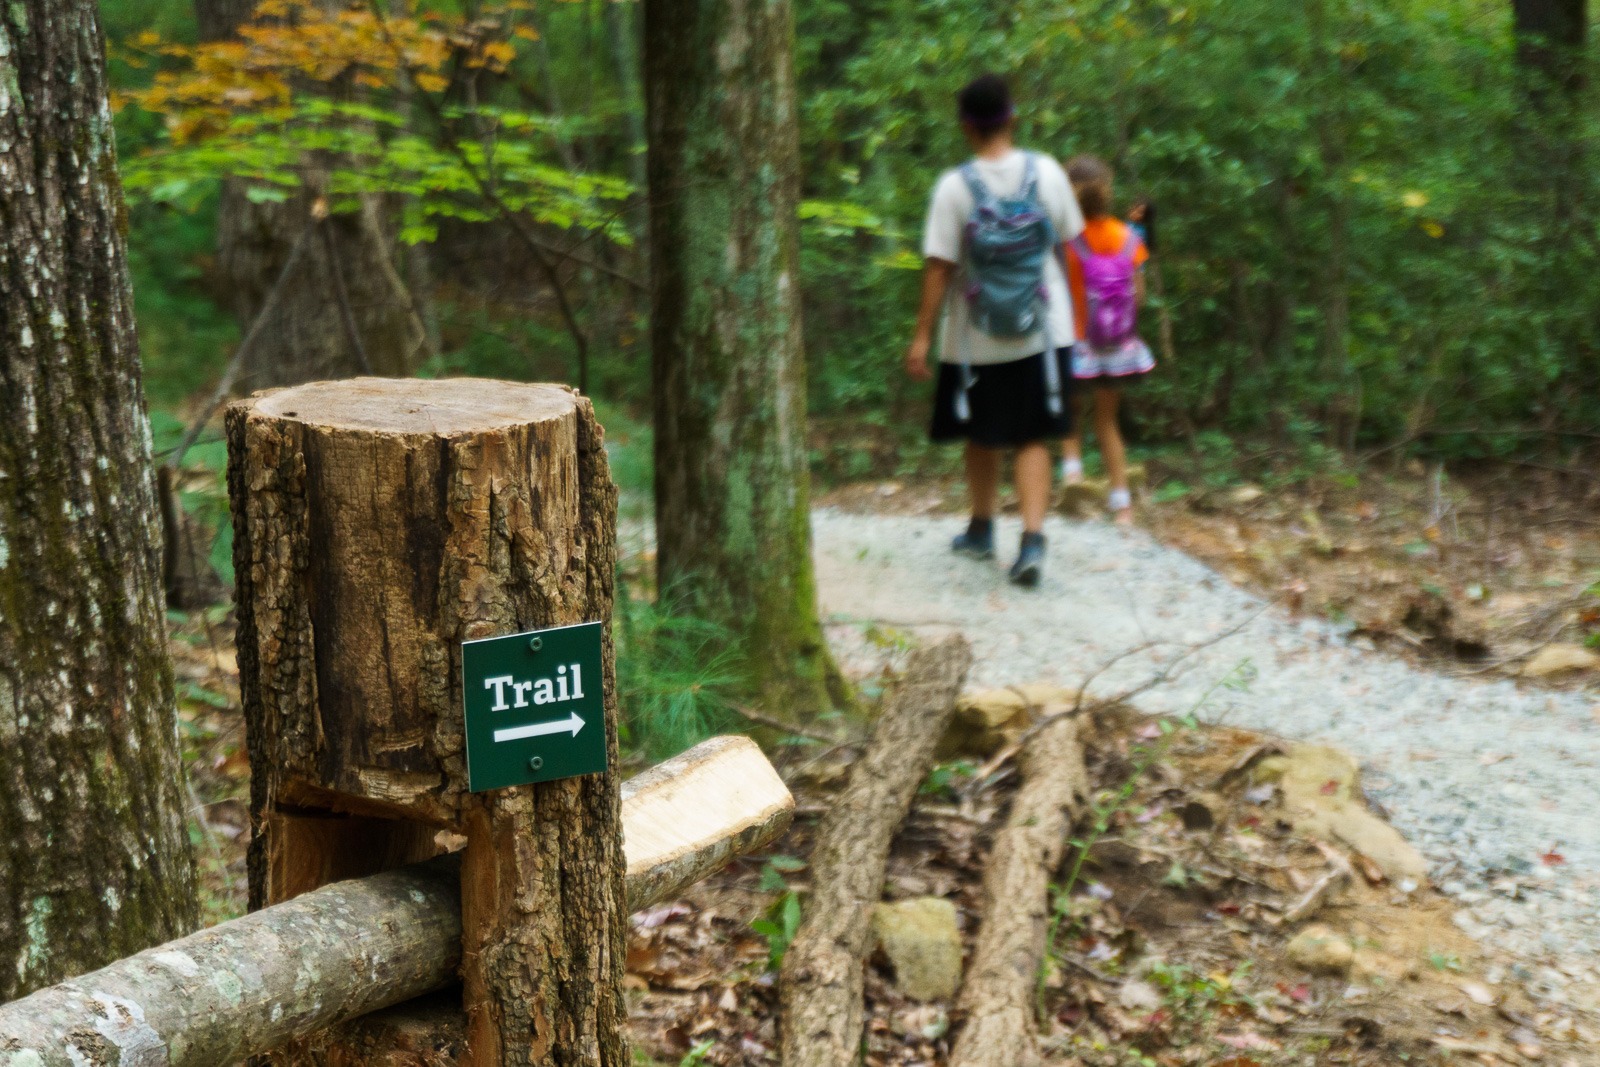 Innovative New Ways to Count Outdoor Recreation